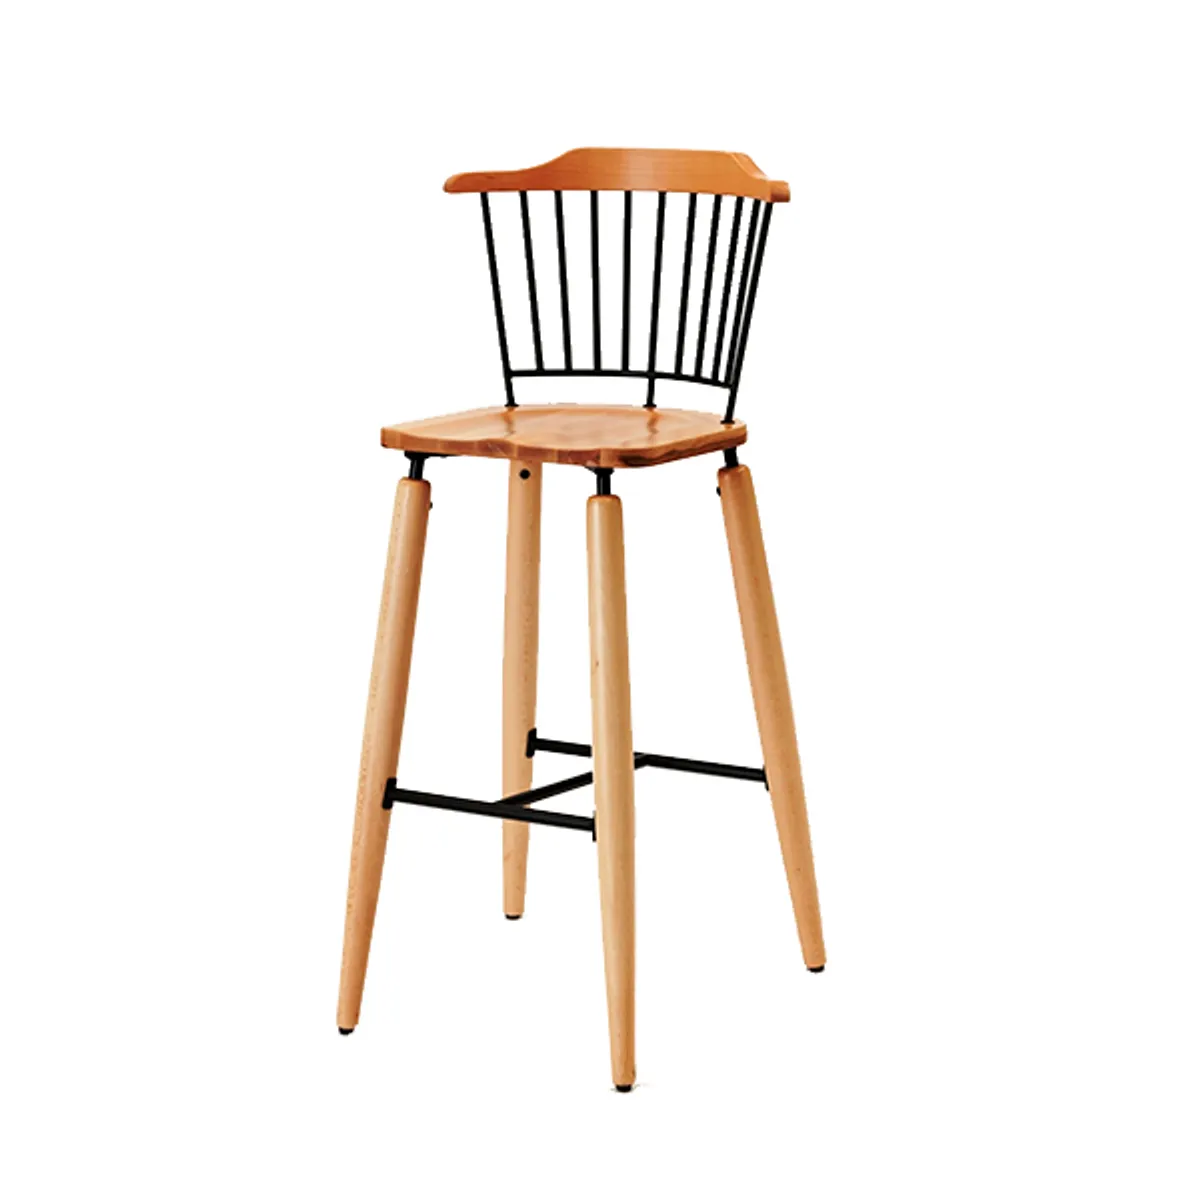 Combo Bar Stool 2 Natural Beech Wood Inside Out Contracts